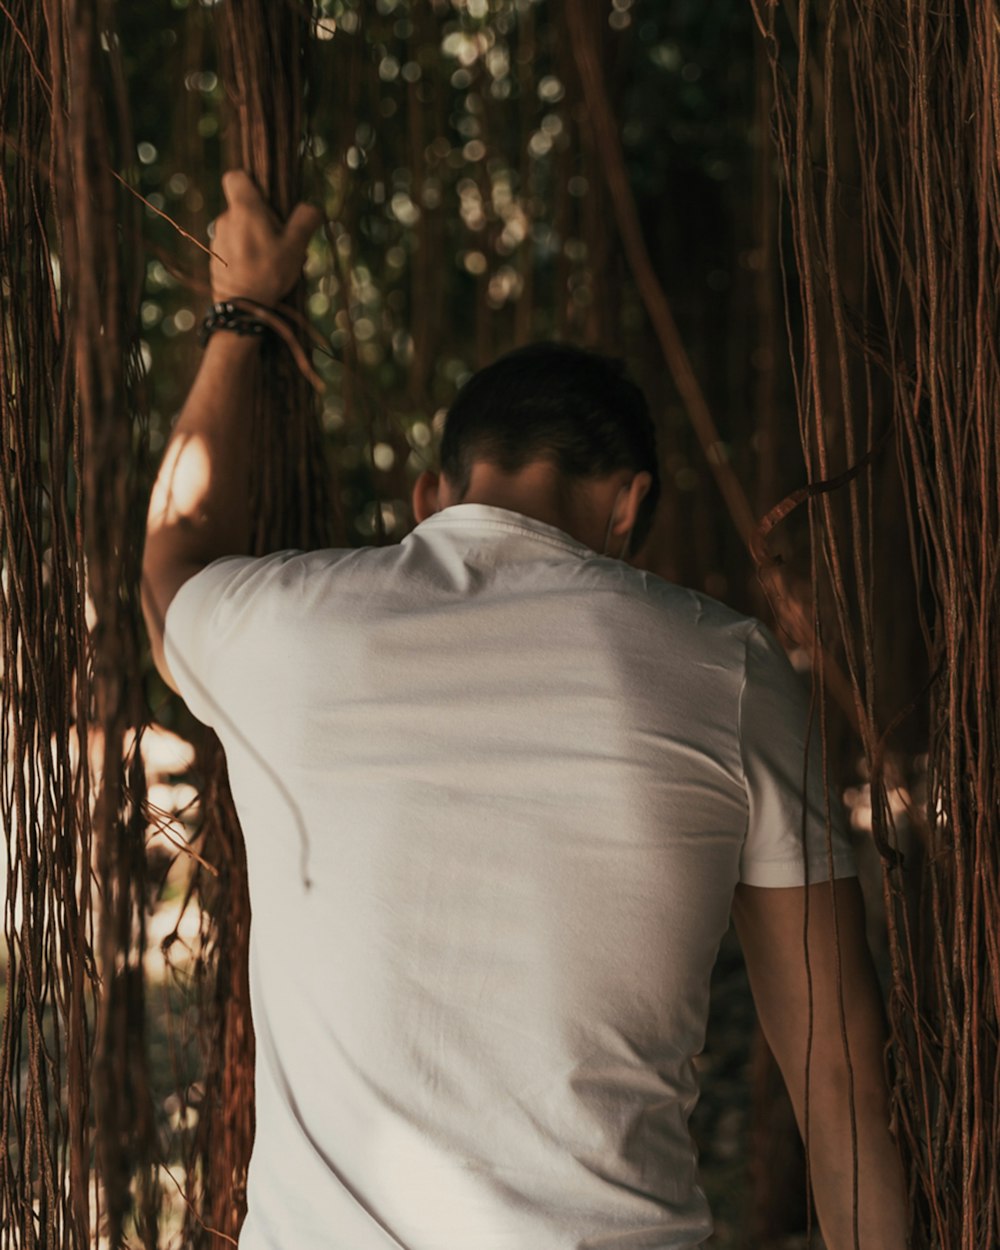 man in white t-shirt standing near bamboo trees